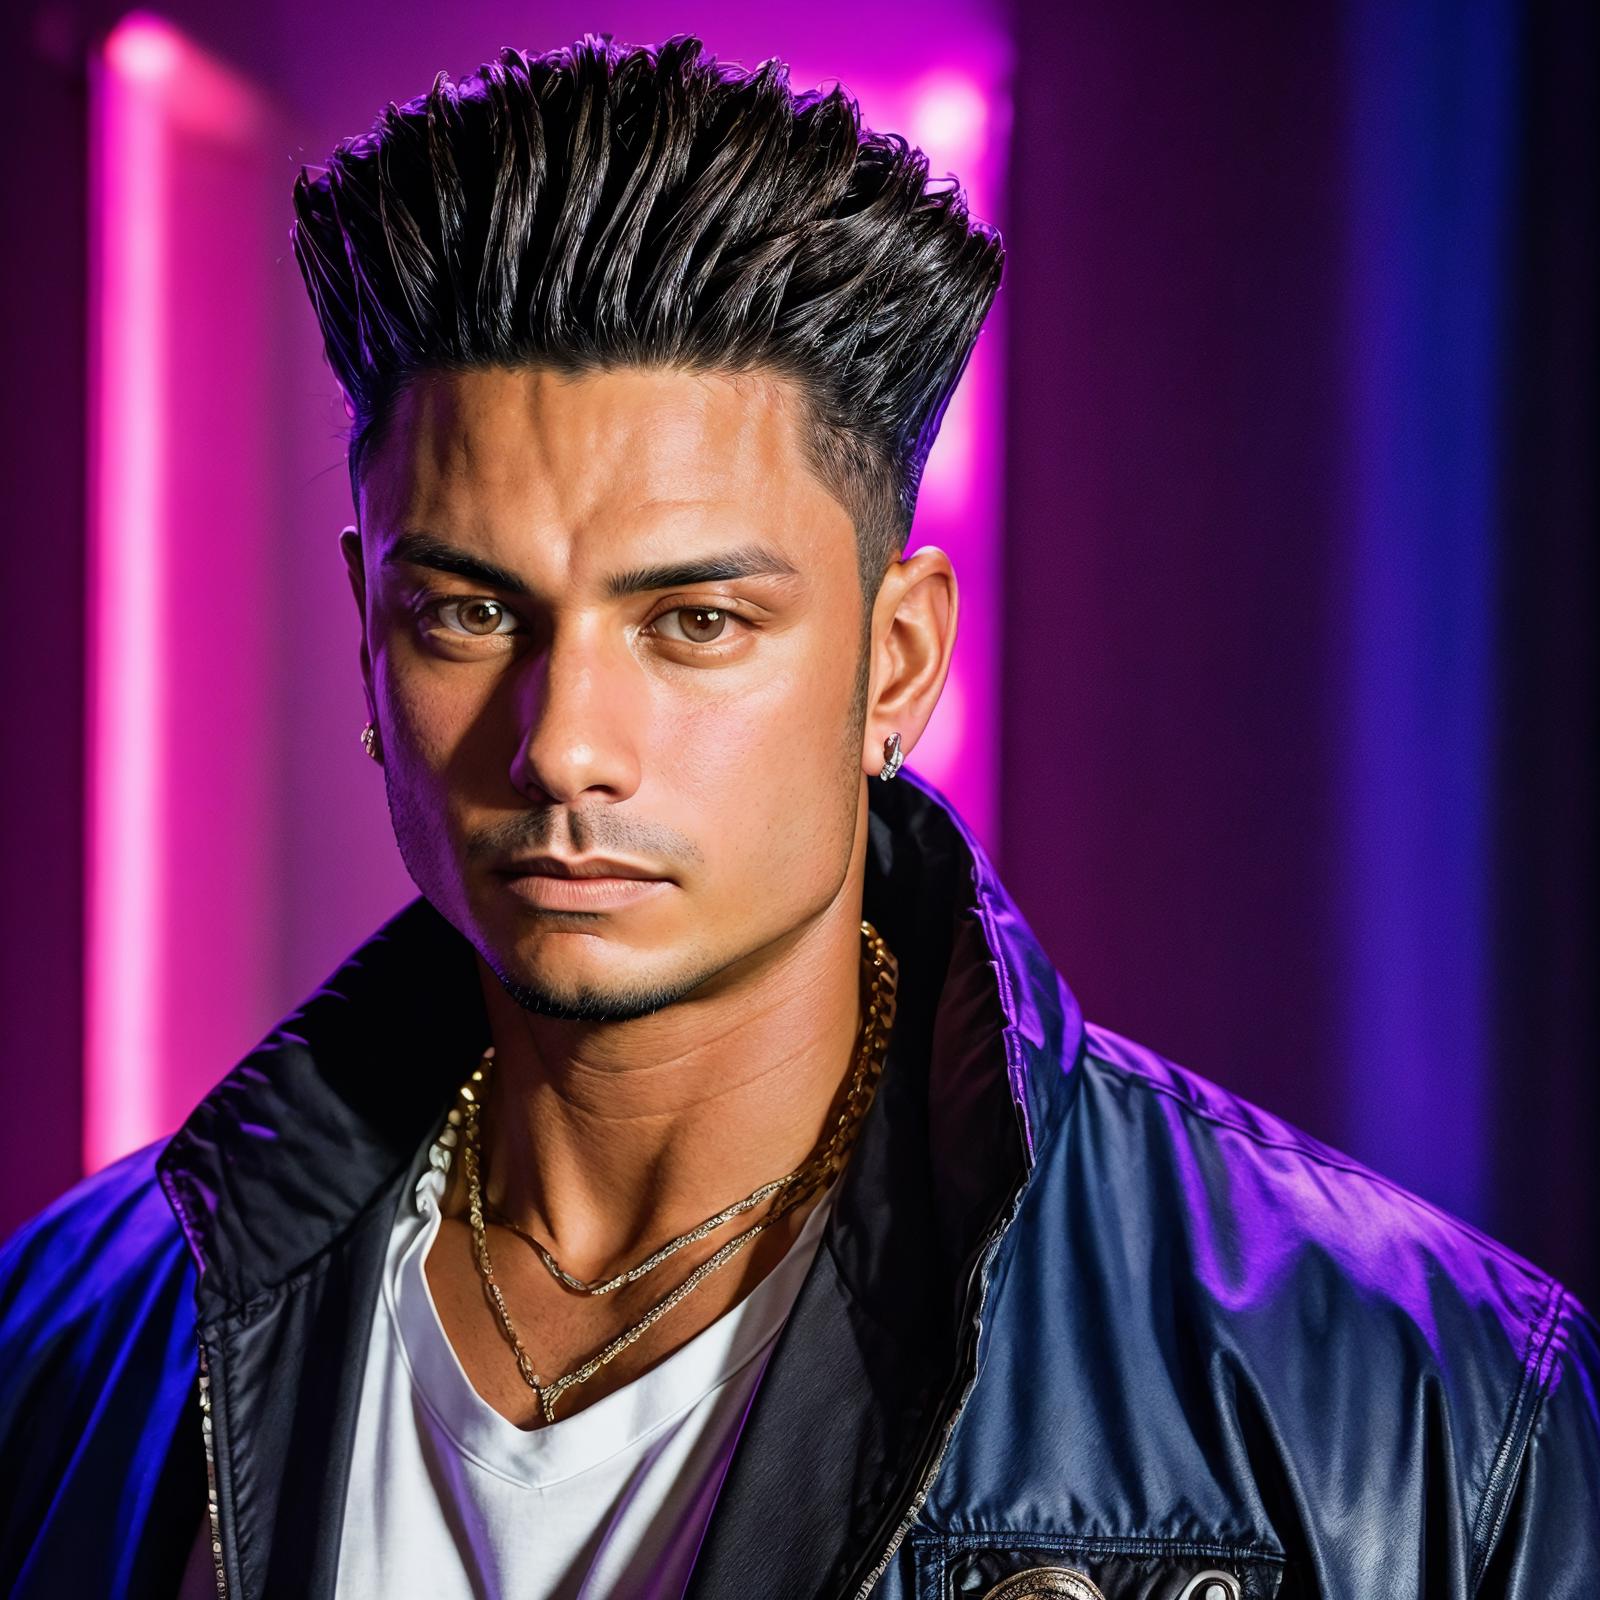 DJ Pauly D image by diffusiondudes